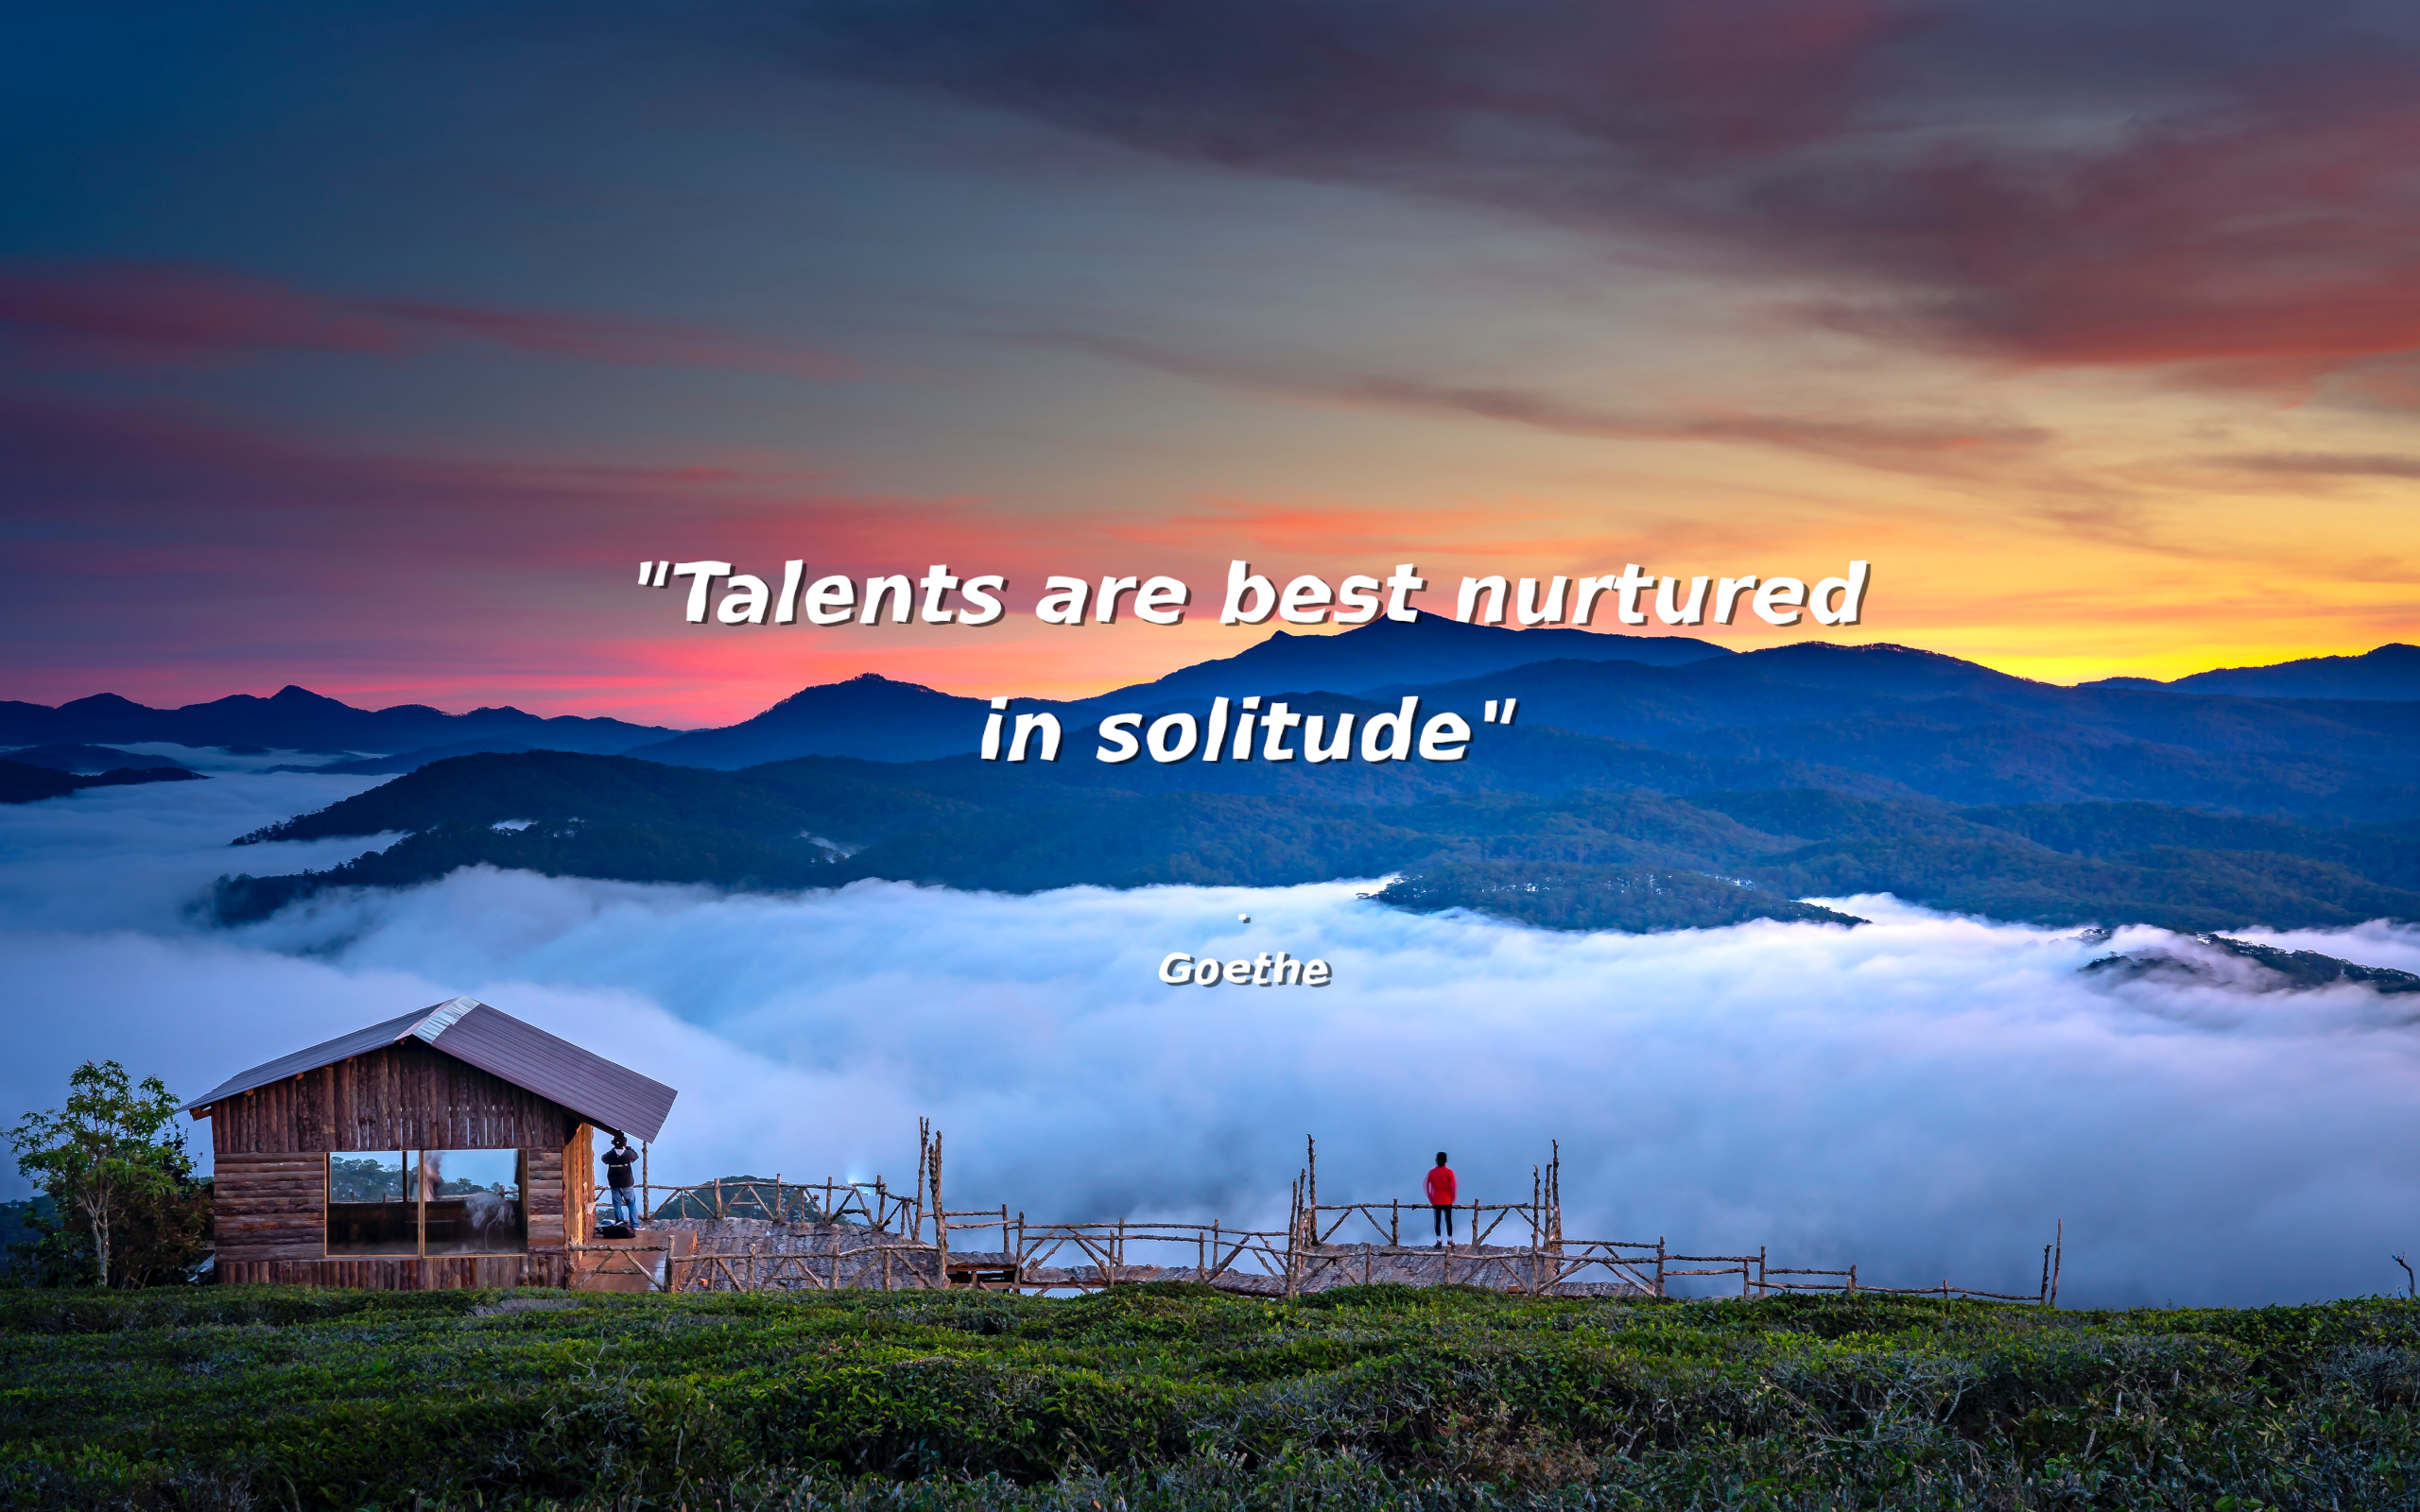 General 2560x1600 nature quote wisdom landscape cabin mountains sunset sunset glow clouds sky grass text